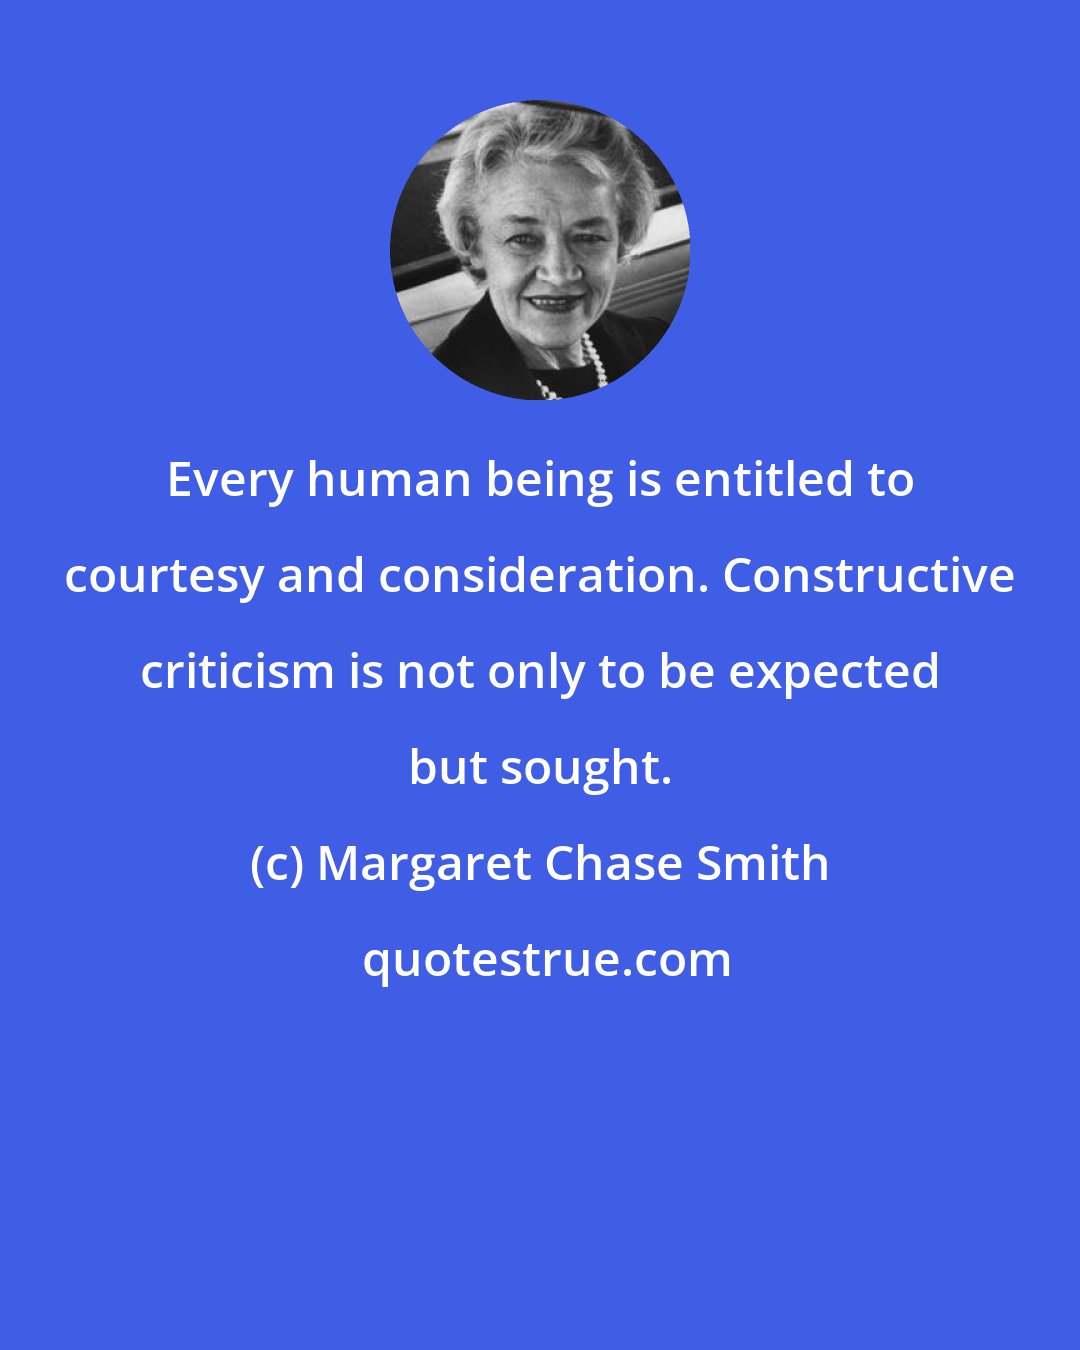 Margaret Chase Smith: Every human being is entitled to courtesy and consideration. Constructive criticism is not only to be expected but sought.